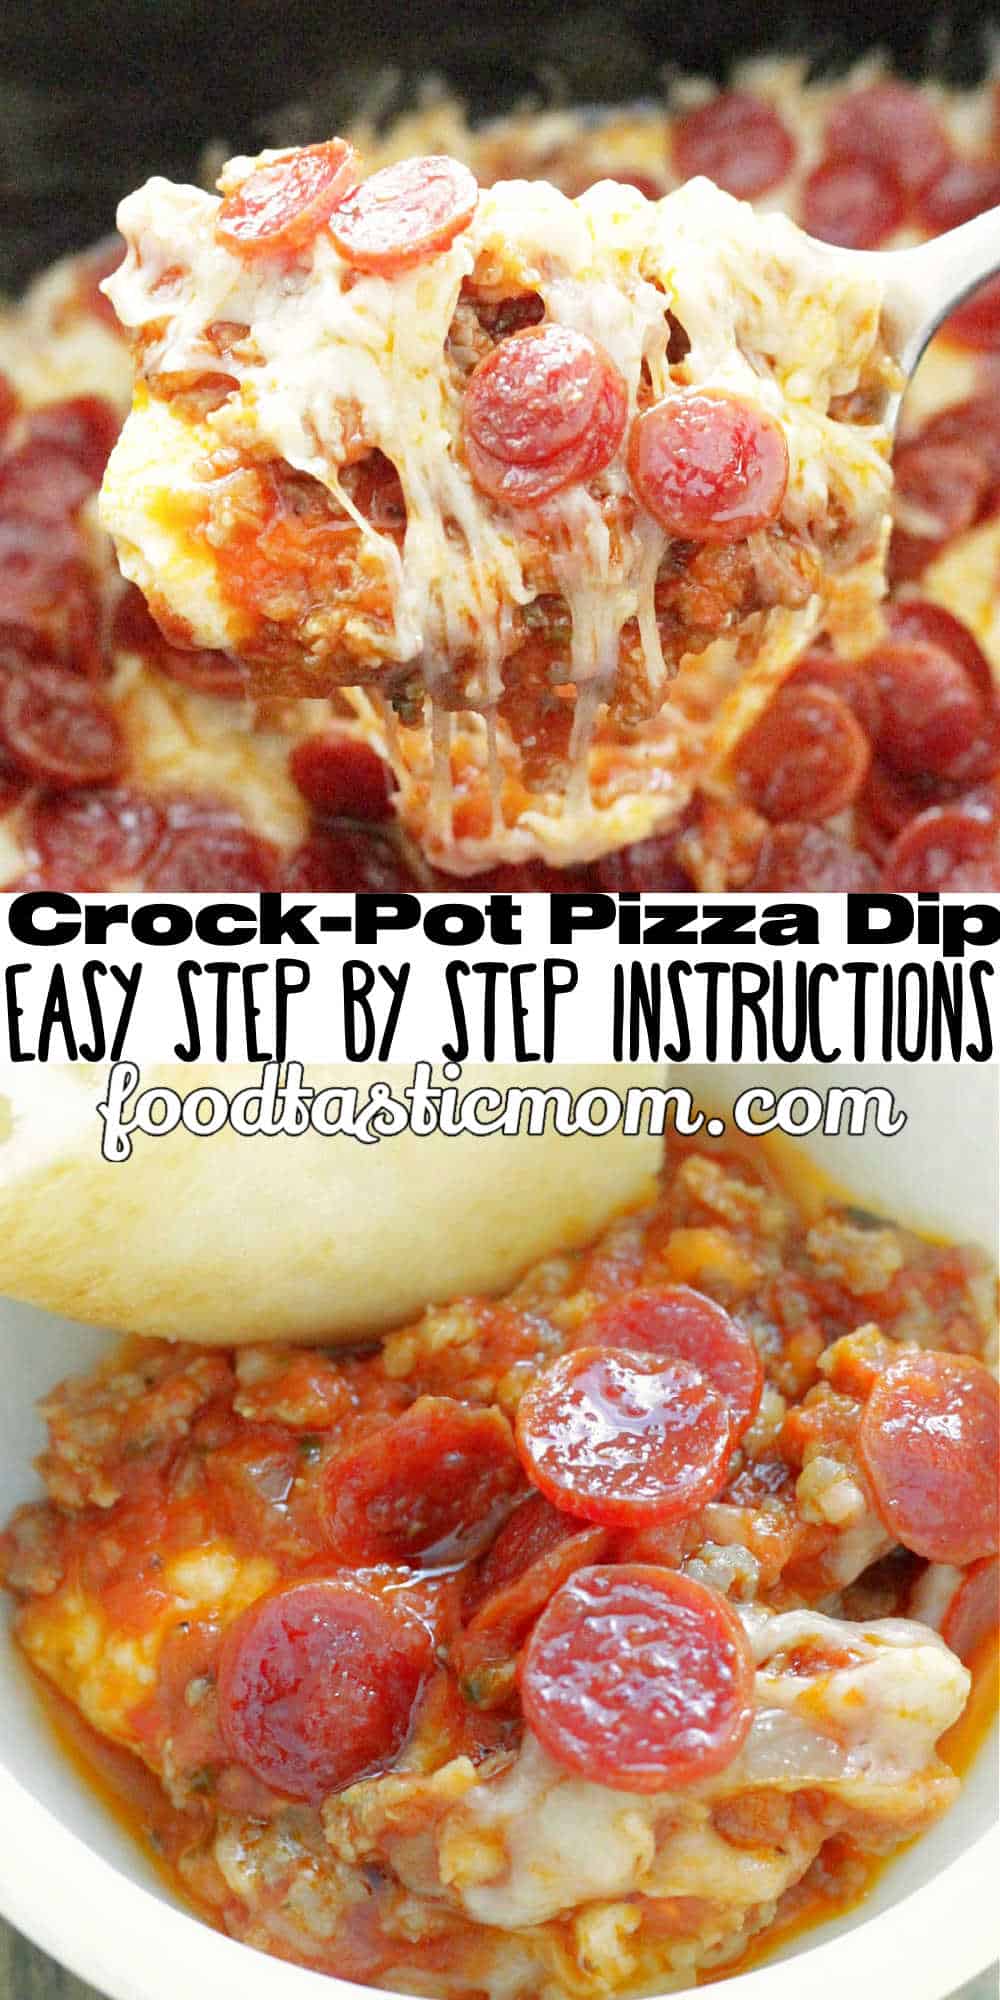 My Pizza Dip is loaded with cheese, pepperoni and sausage and is made for the slow cooker, so the cheese stays hot and melty. via @foodtasticmom